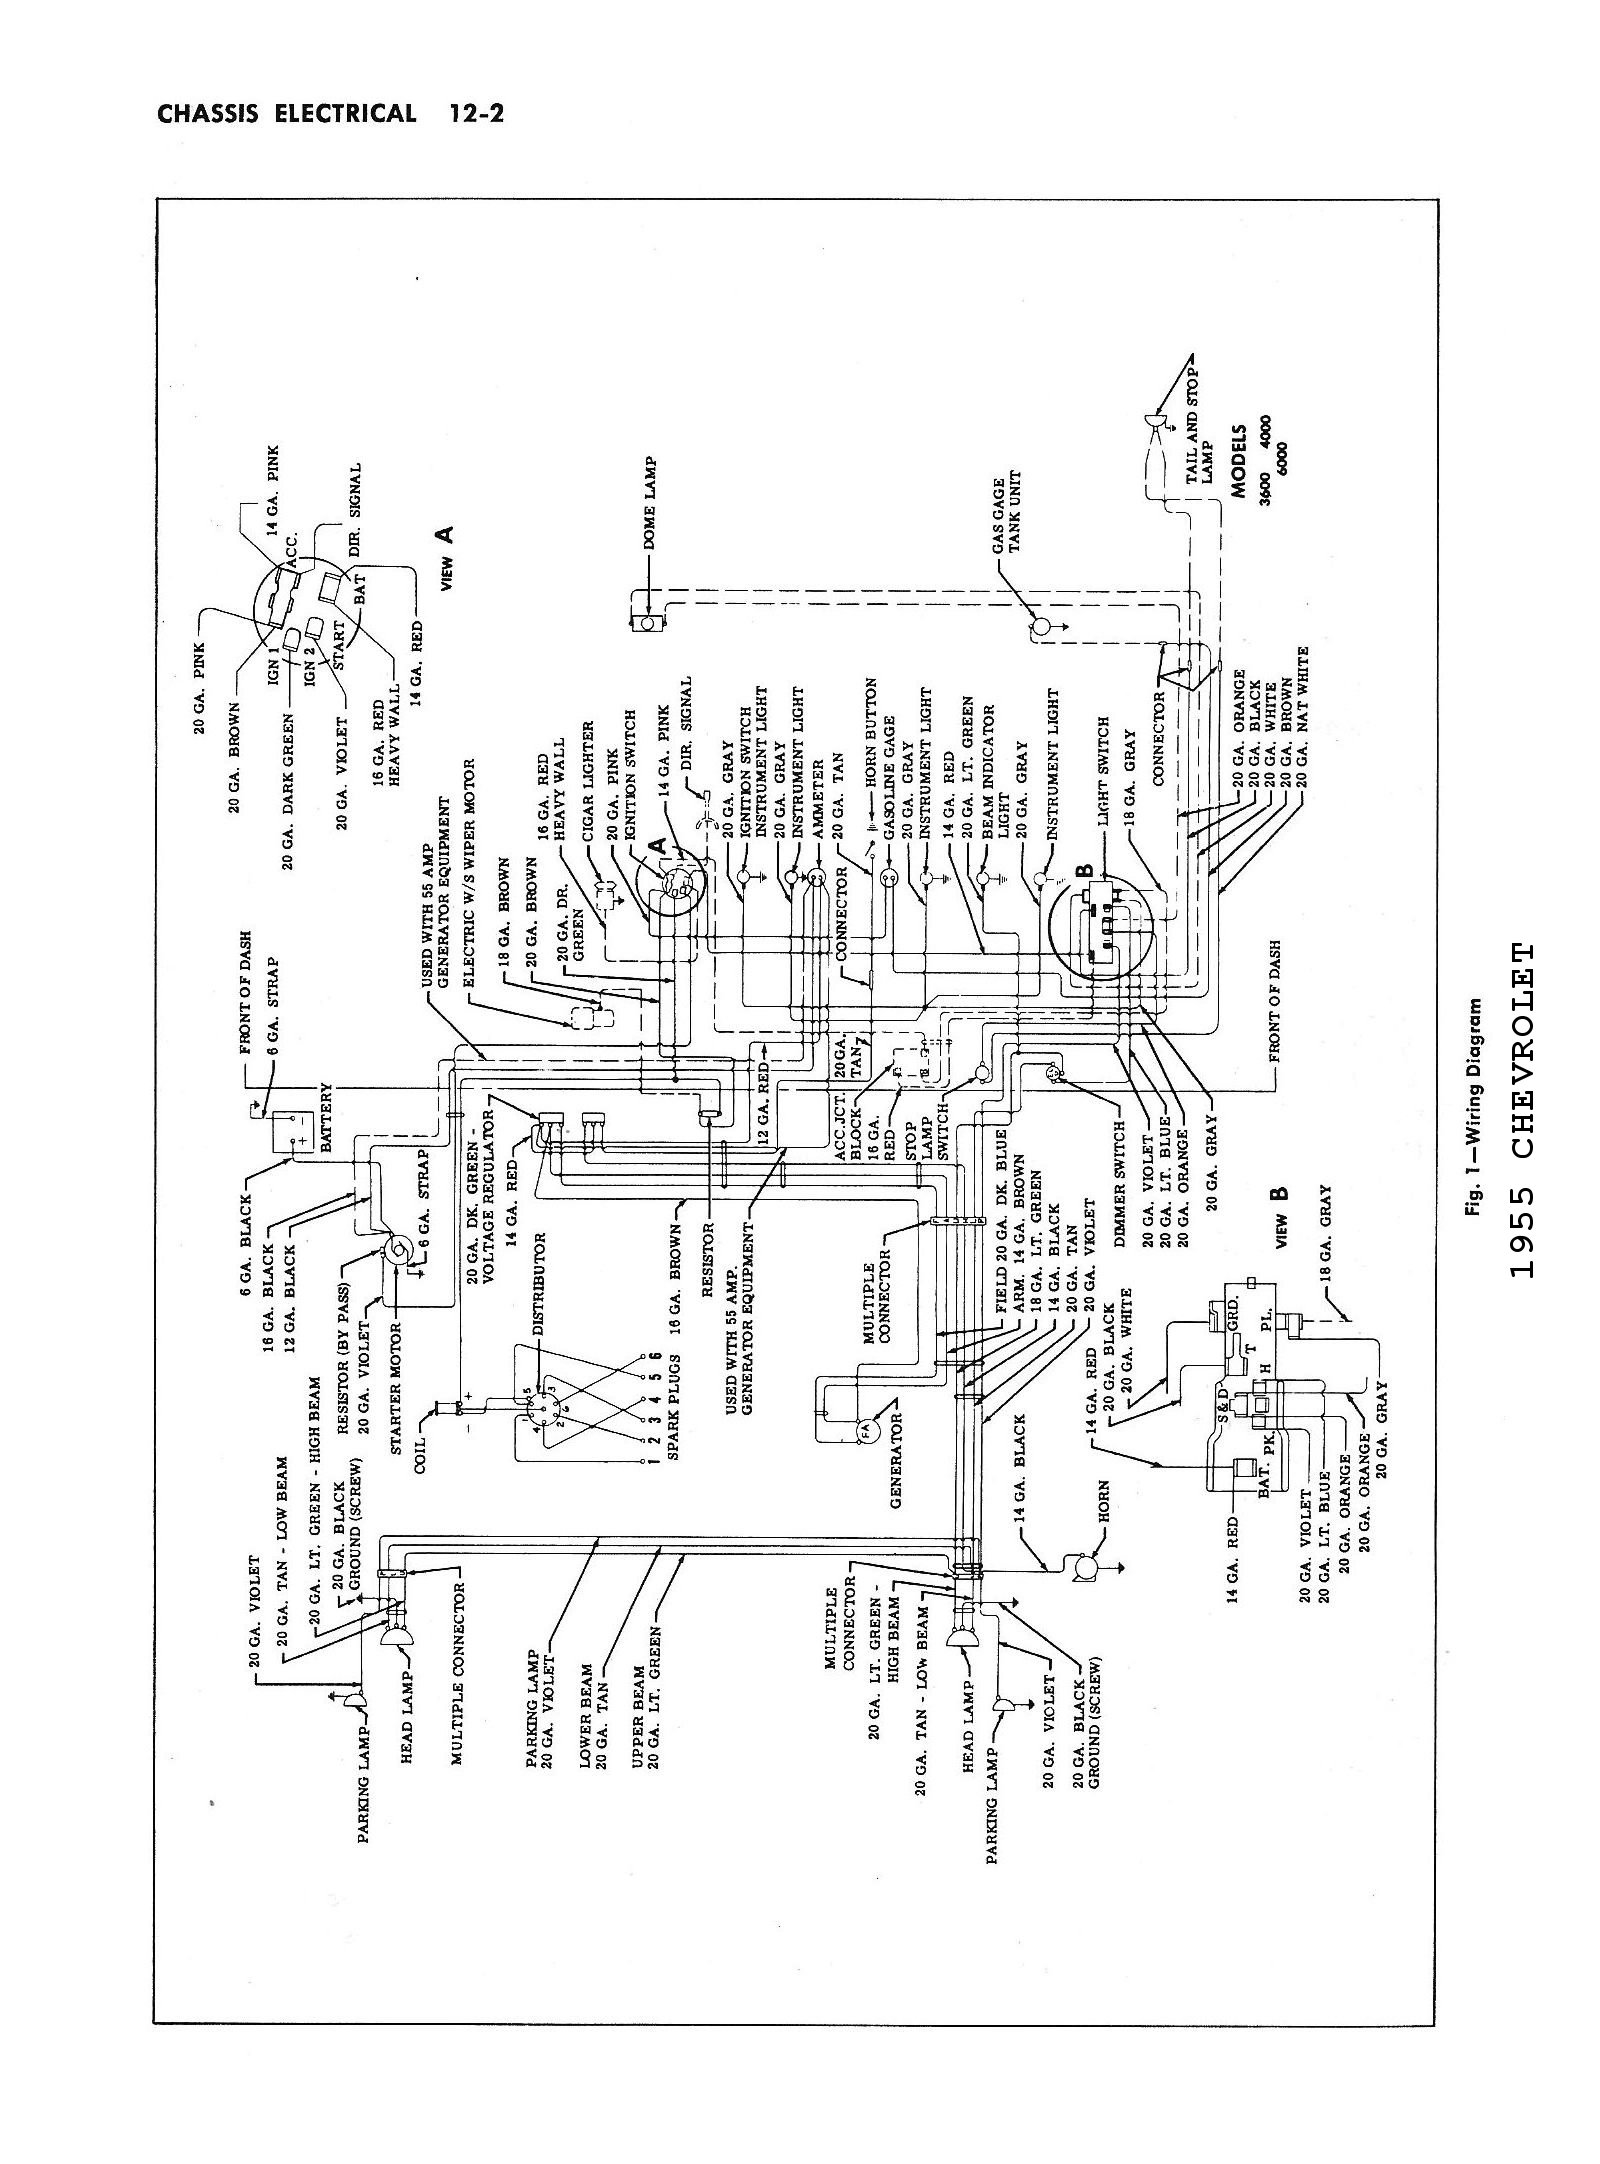 1988 Chevy Truck Radio Wiring Diagram from chevy.oldcarmanualproject.com